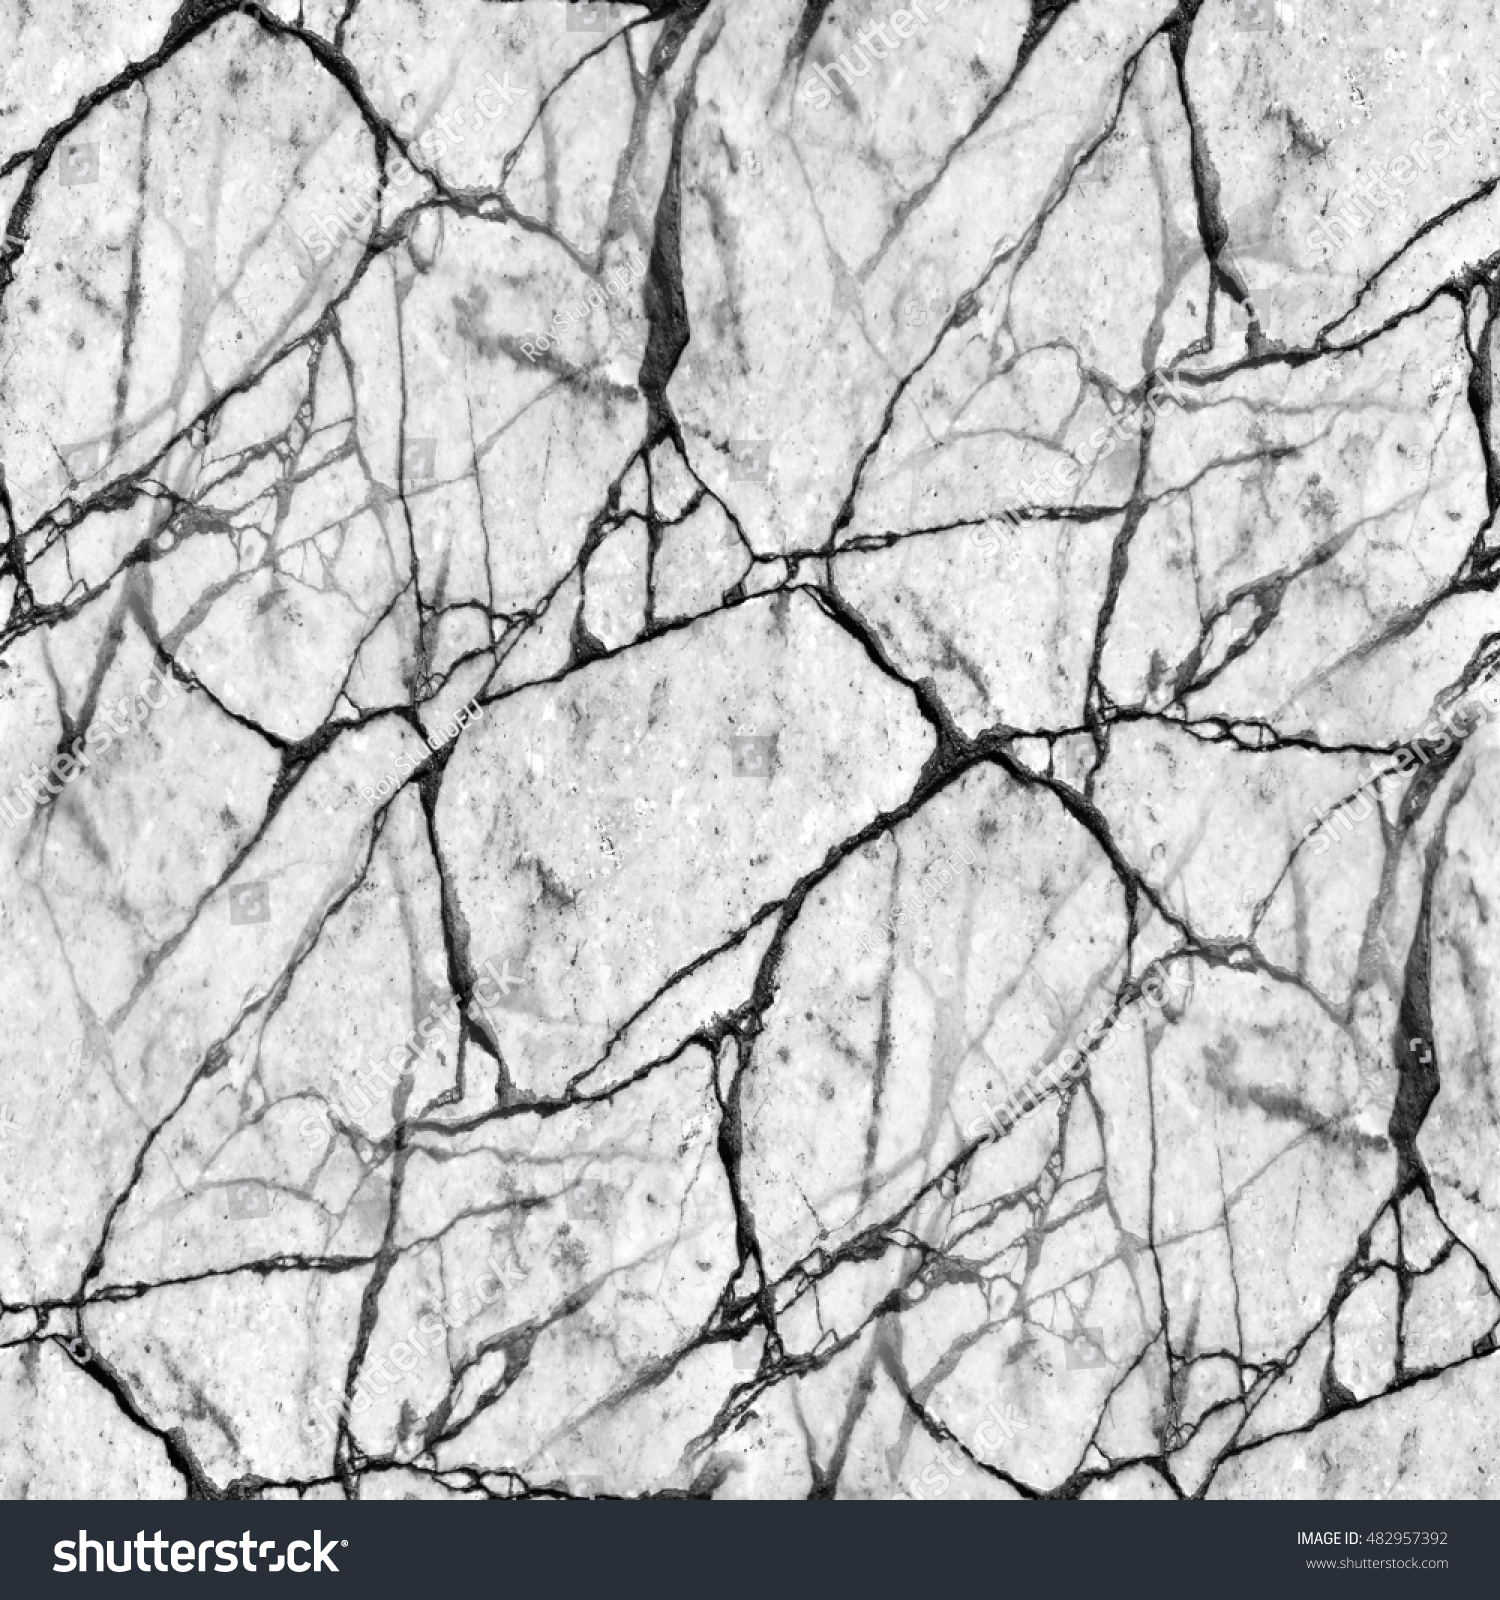 Cracked Wall Texture Broken Marble Slab Stock Photo (Royalty Free ...